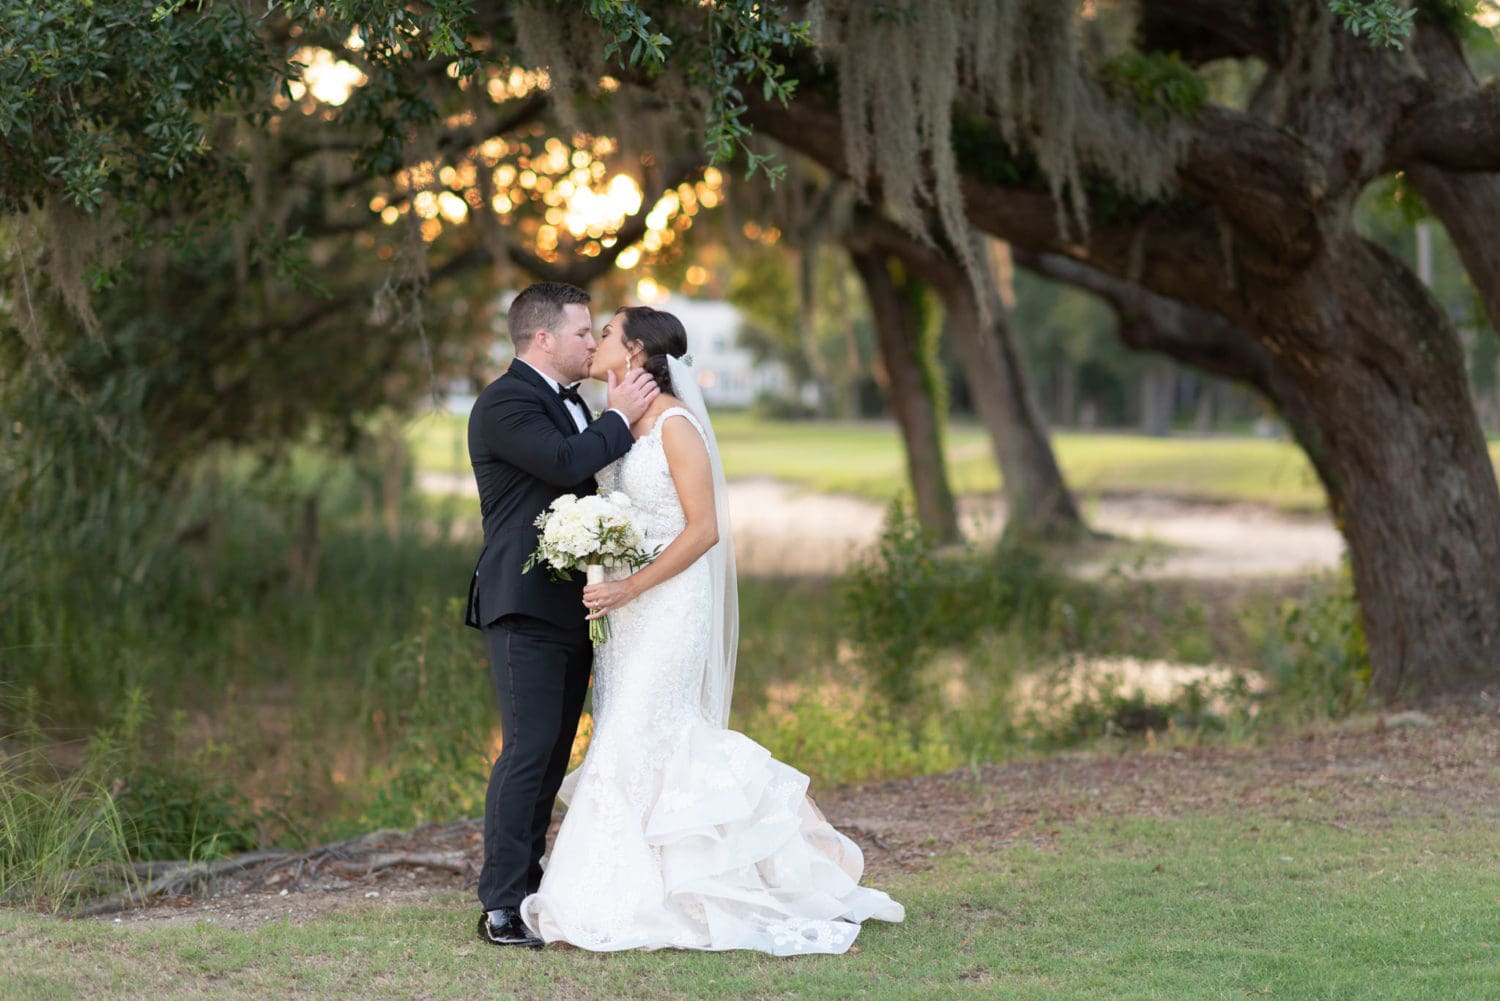 Groom pulling bride in for a kiss Pawleys Plantation